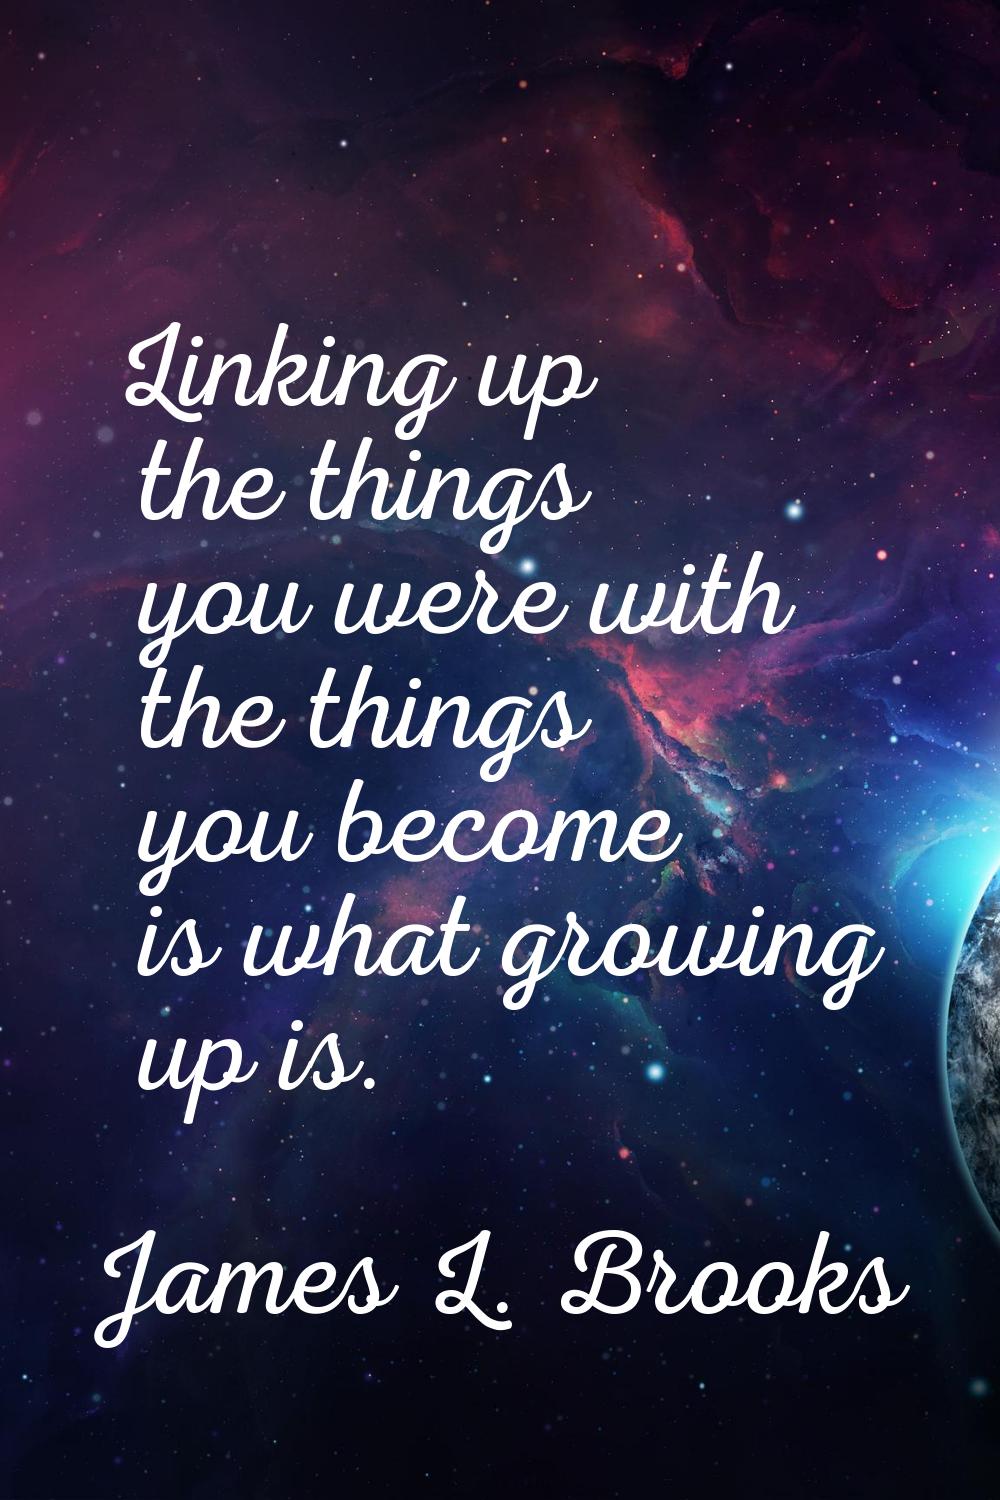 Linking up the things you were with the things you become is what growing up is.